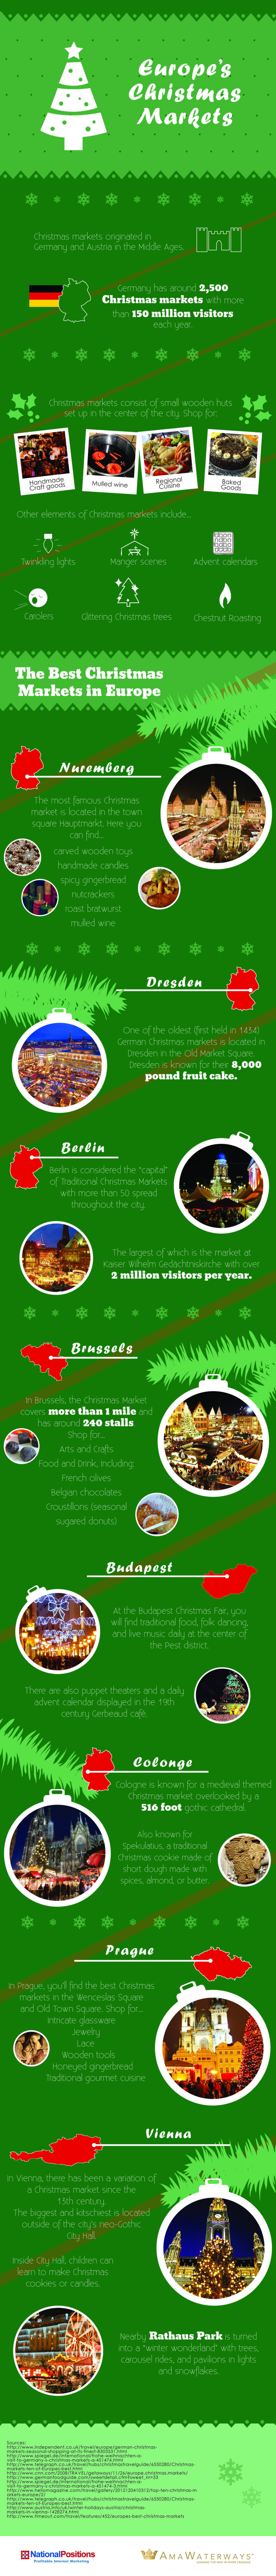 Europes Christmas Markets Infographic